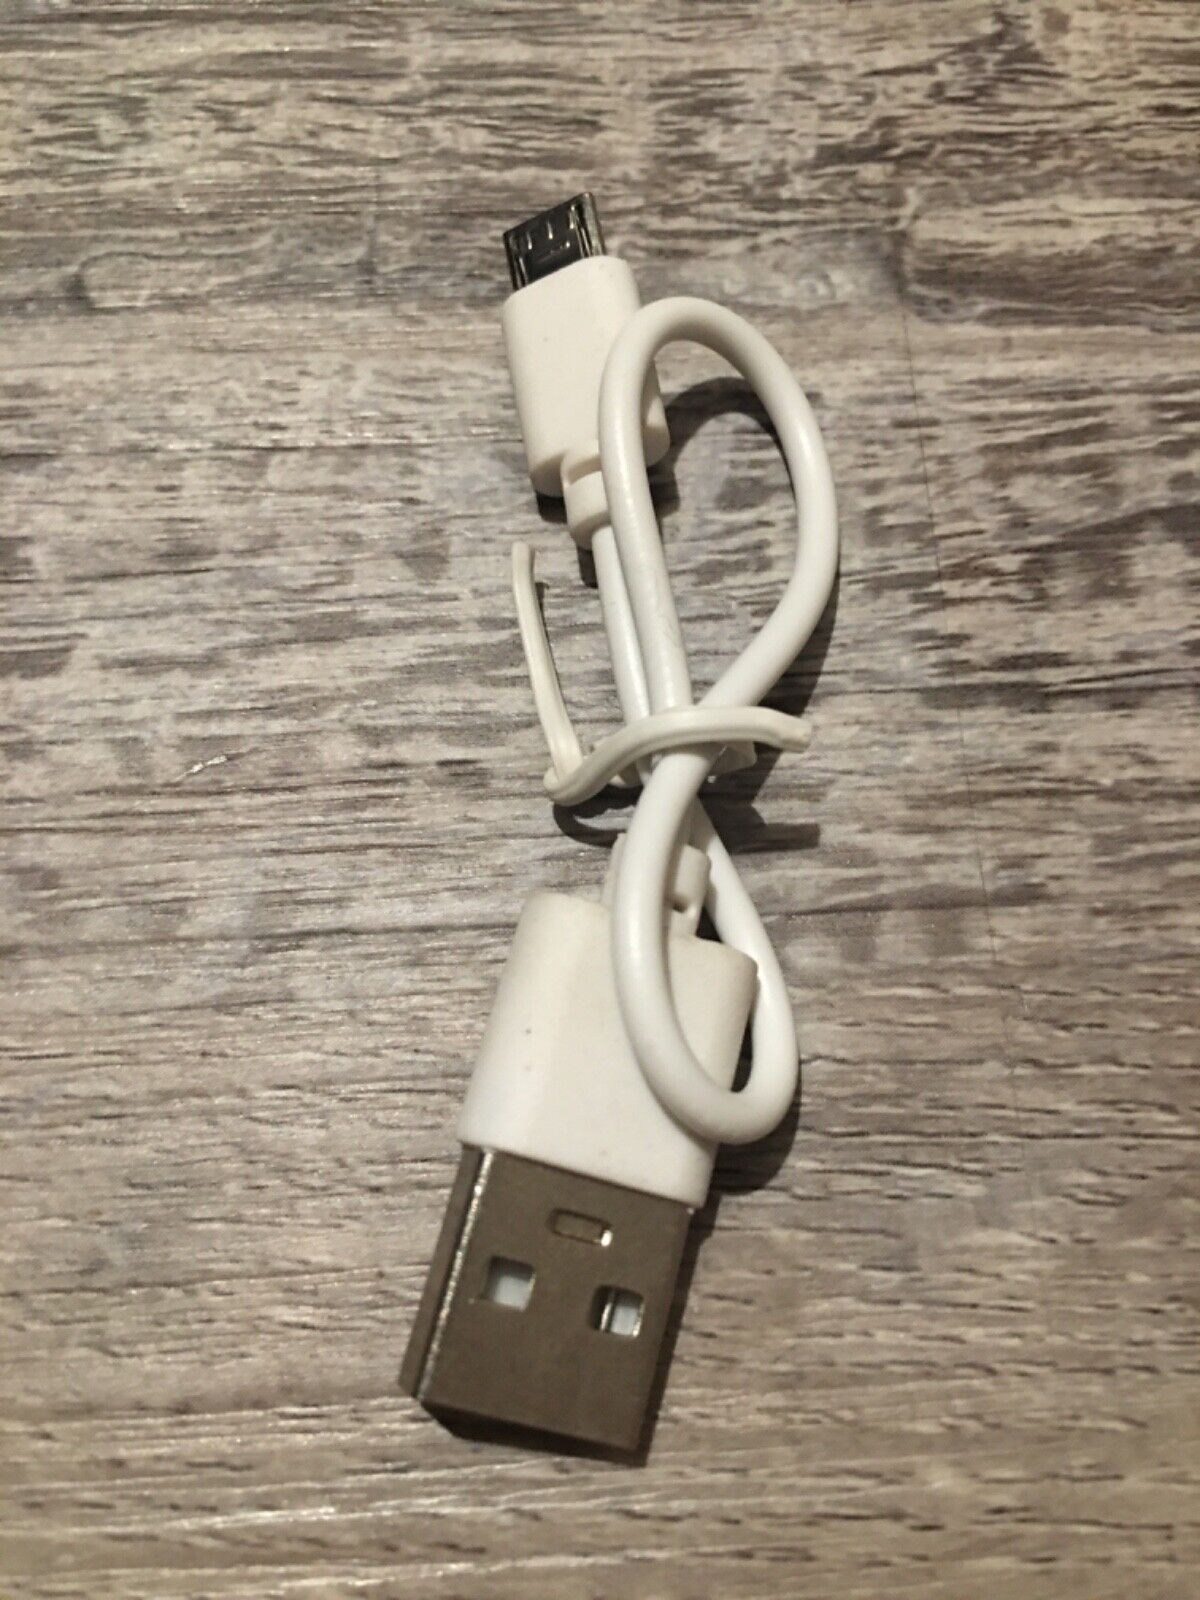 6 inch Extra Short USB 2.0 A Male to Micro-B Male Cable for Android White Color